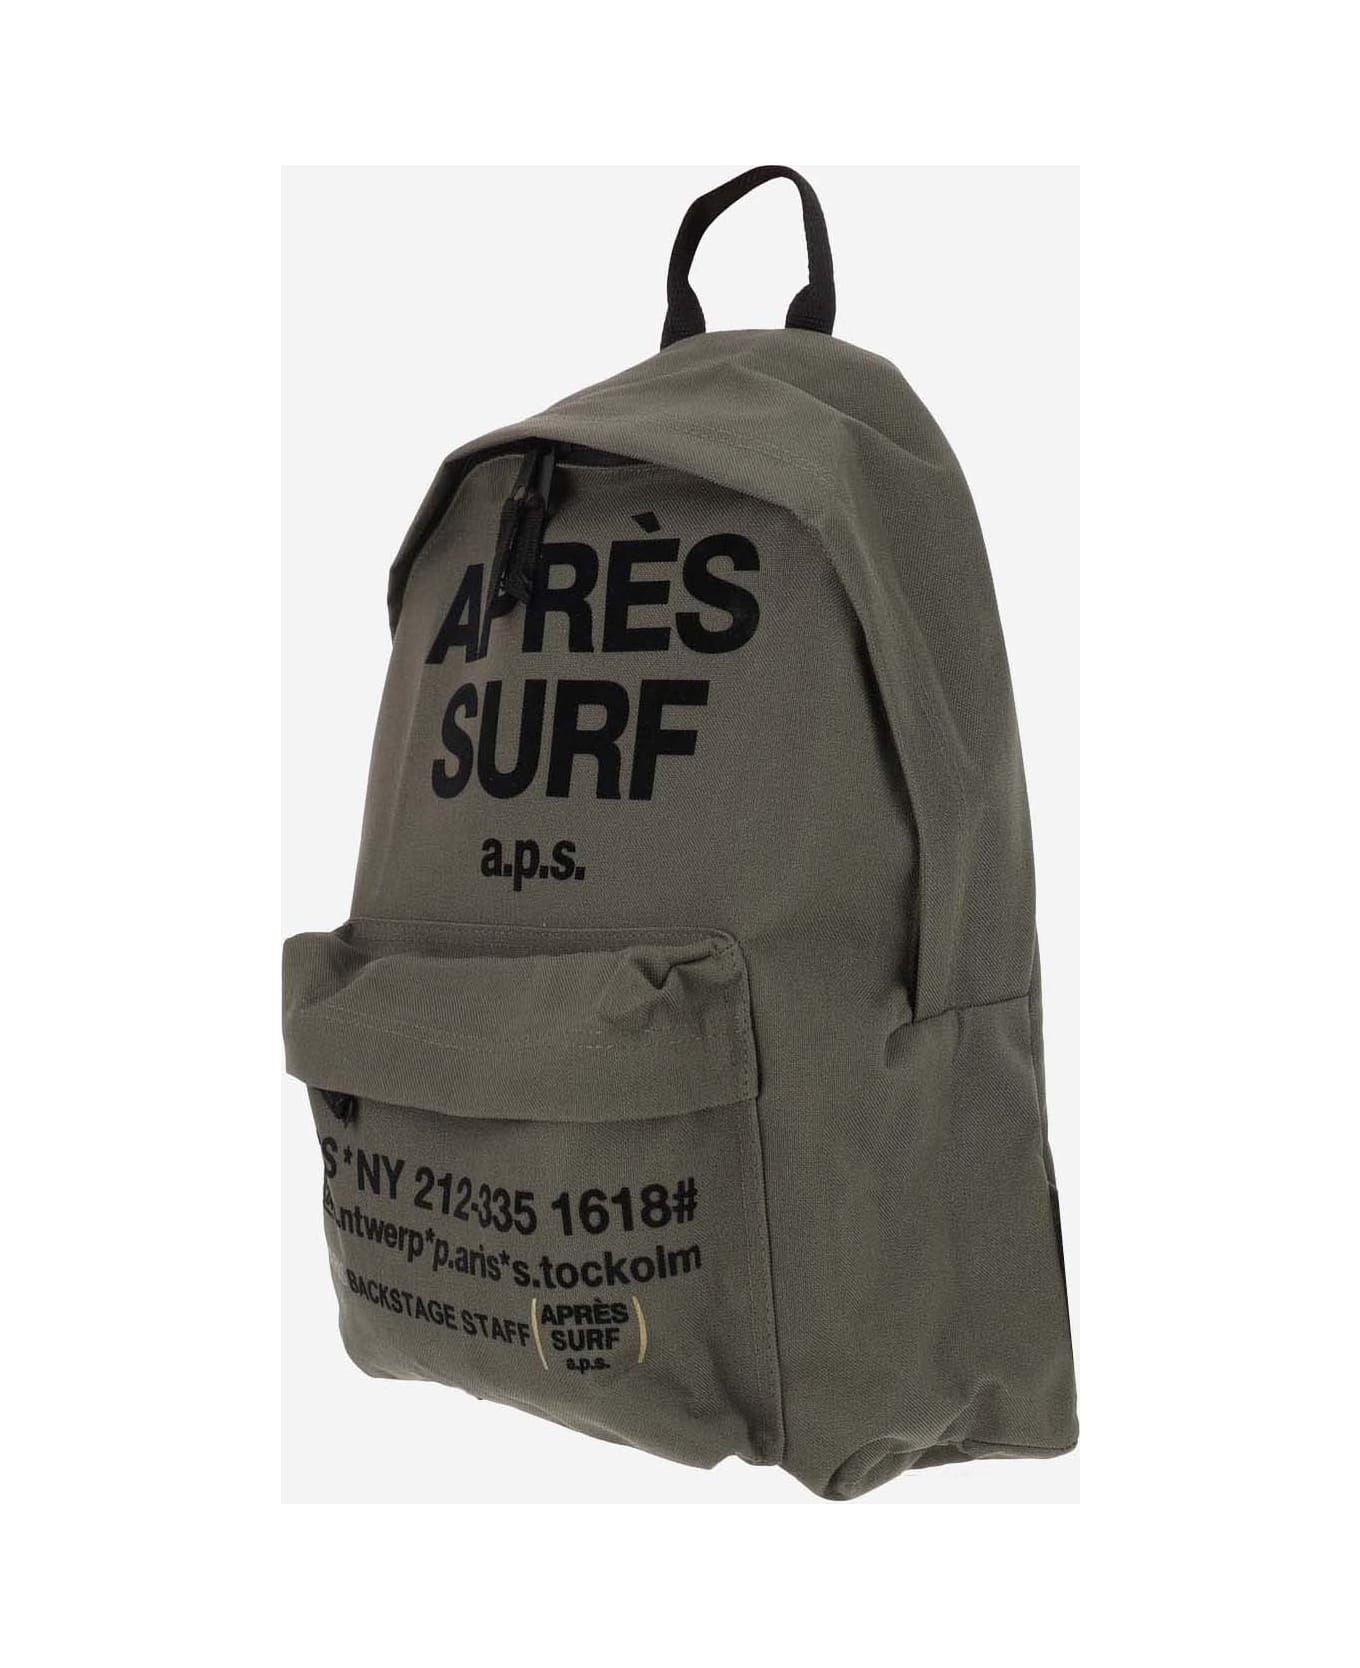 Apres Surf Technical Fabric Backpack With Logo - Green